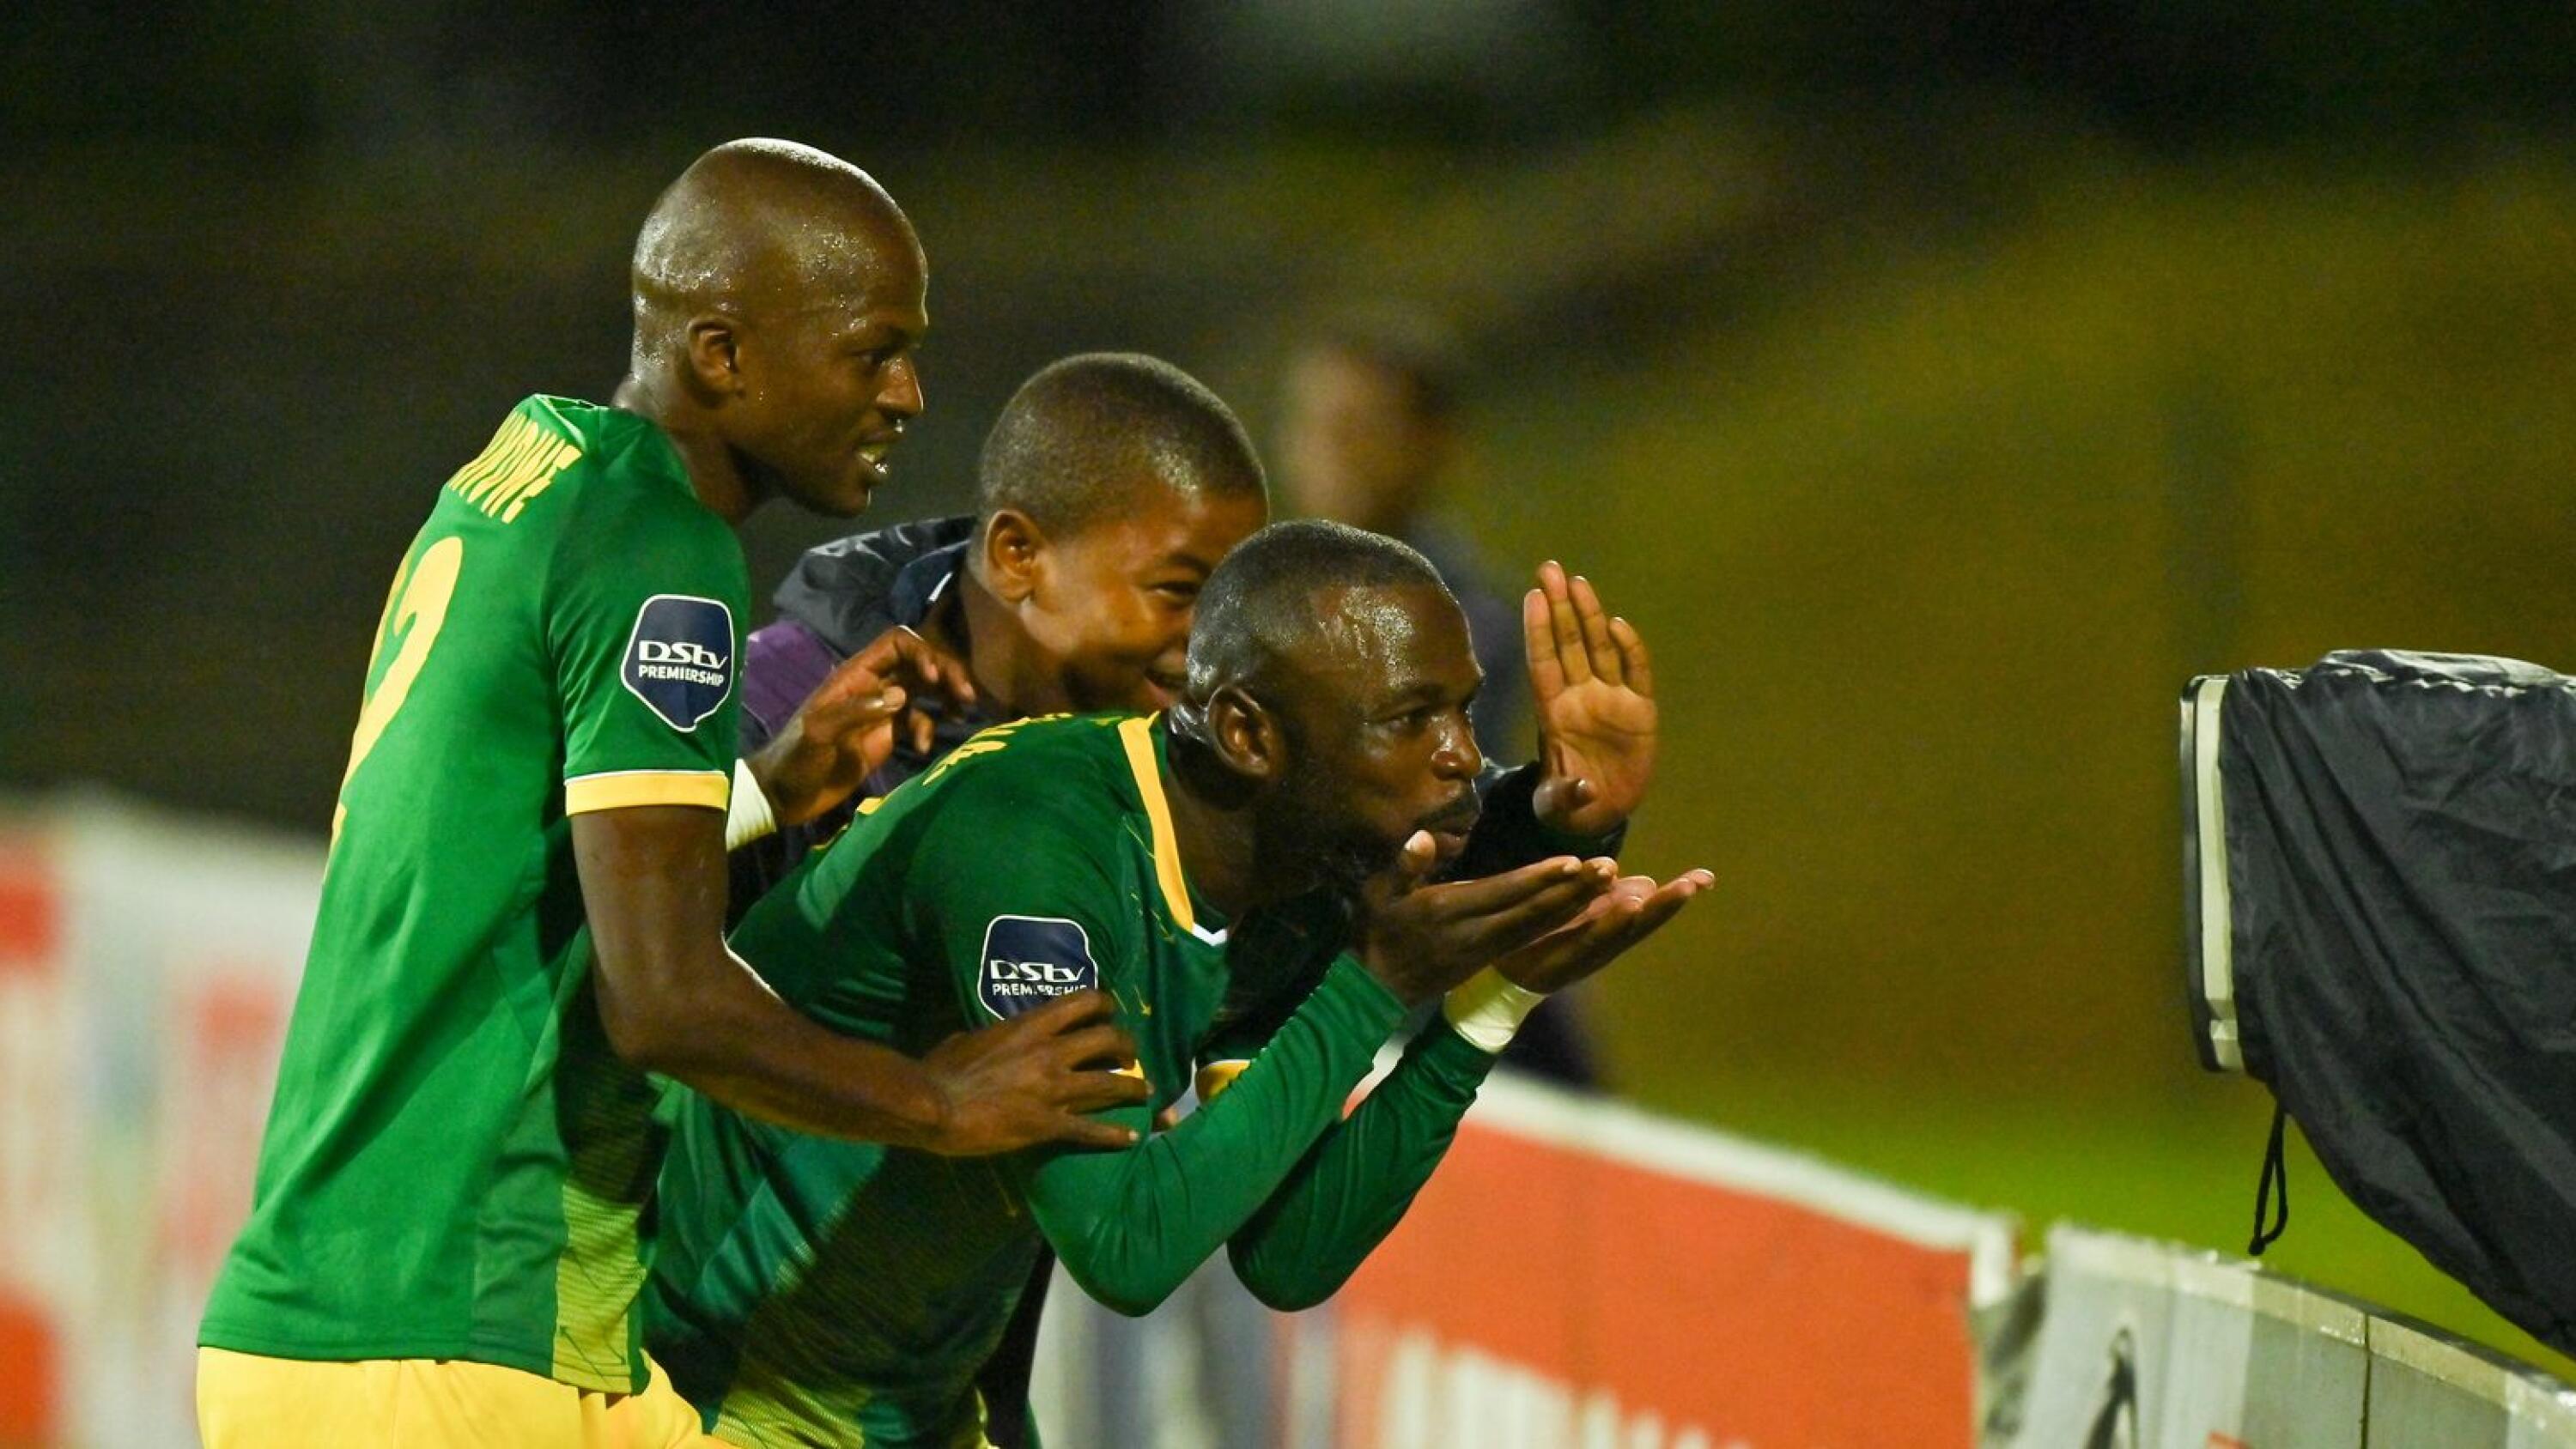 Velemseni Ndwandwe of Golden Arrows celebrates with Knox Mutizwa after another goal during their DStv Premiership game against Marumo Gallants FC at Princess Magogo Stadium in Durban on Wednesday